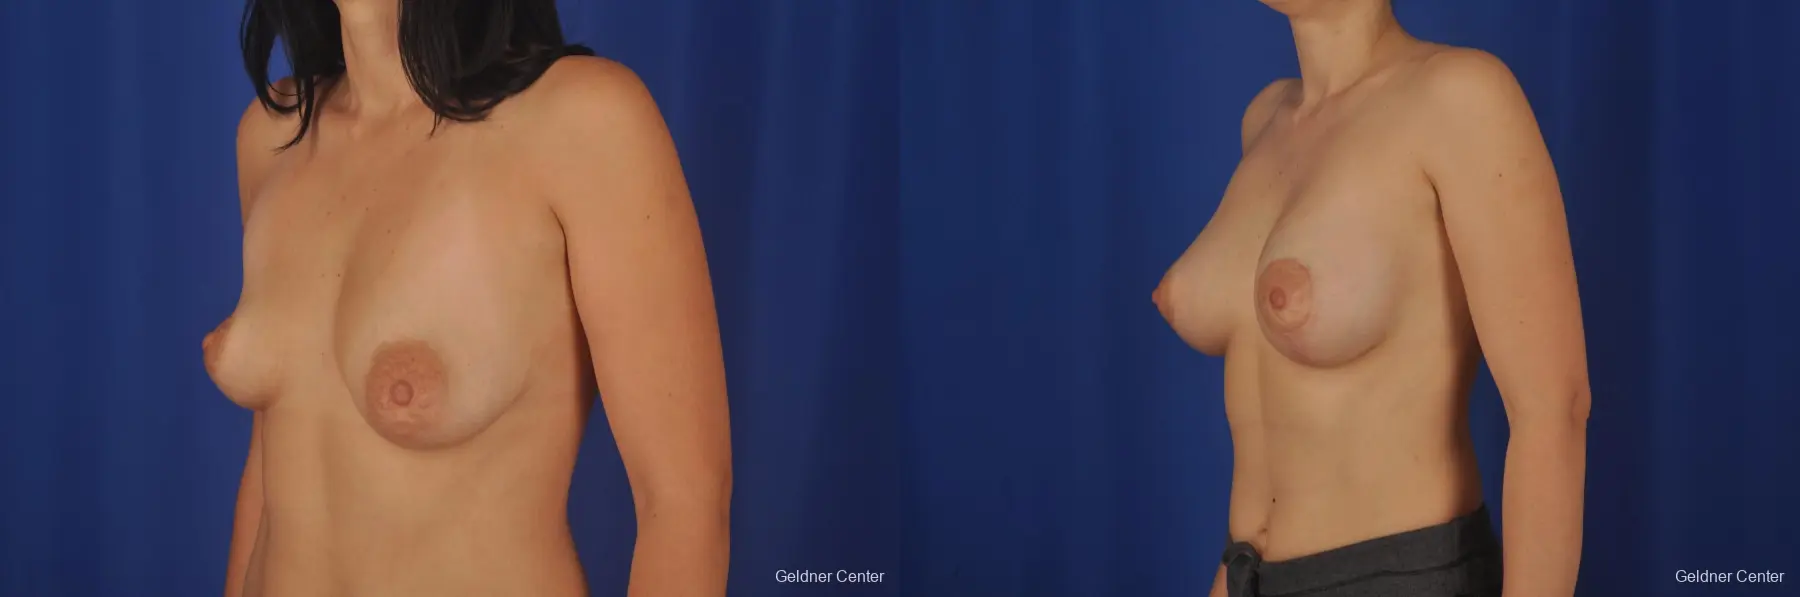 Breast Lift Lake Shore Dr, Chicago 2307 - Before and After 3